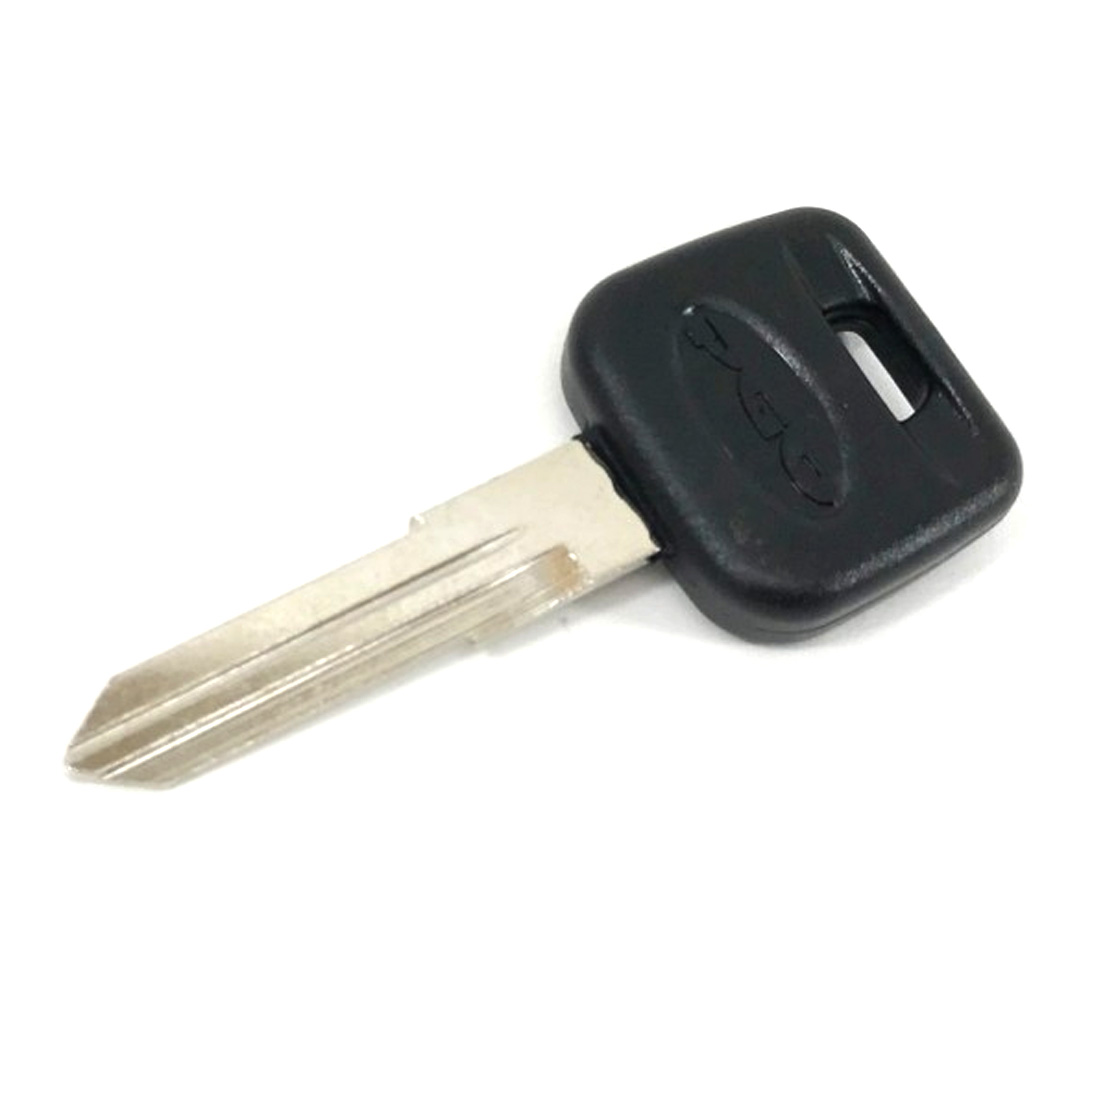 Version 3 For Moped Scooter FREE SHIPPING New Blank Key Set 